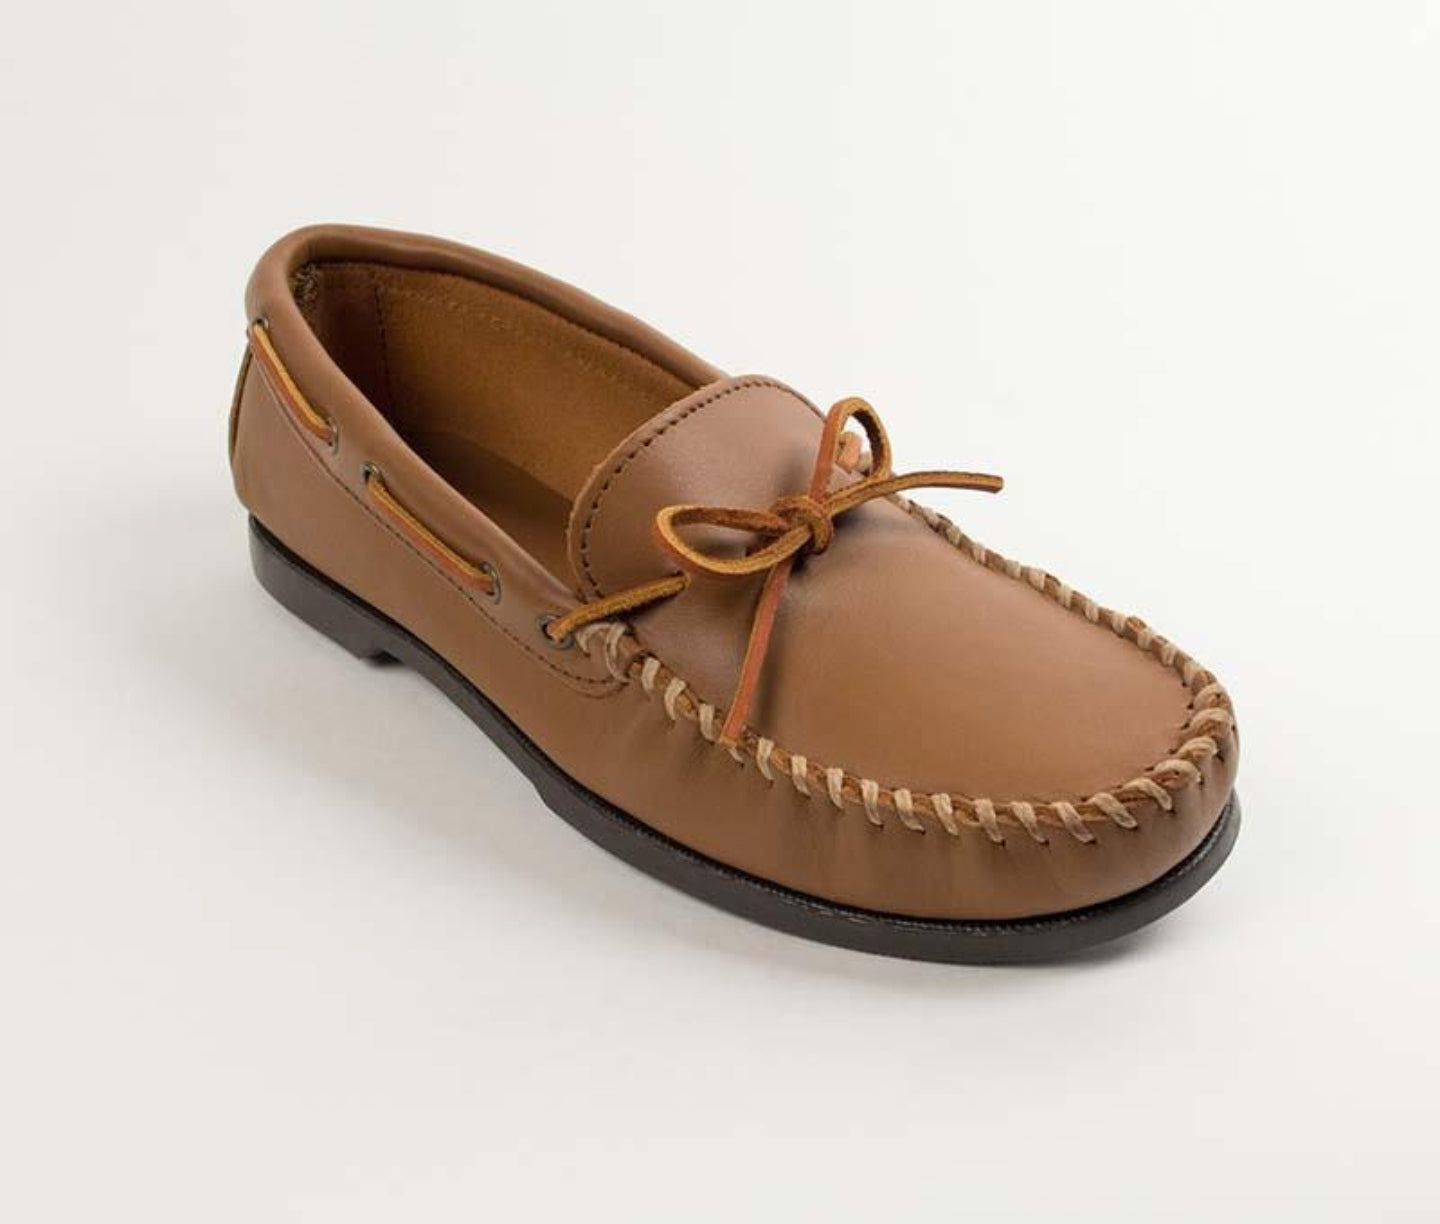 Classic Camp Moccasin in Maple from 3/4 Angle View